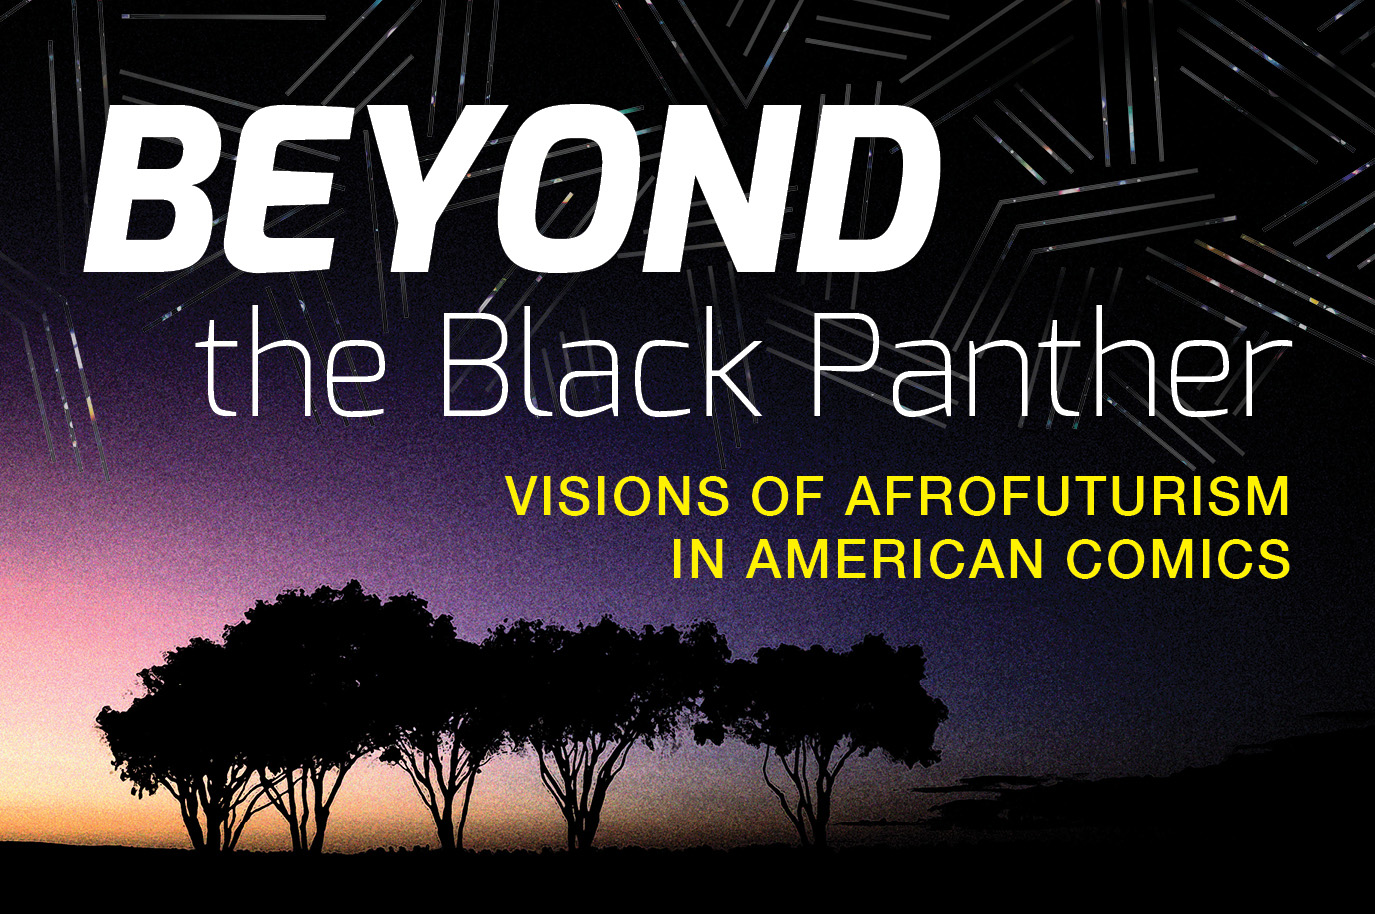 Call for Submissions: New Blog Series on The Black Panther - AAIHS